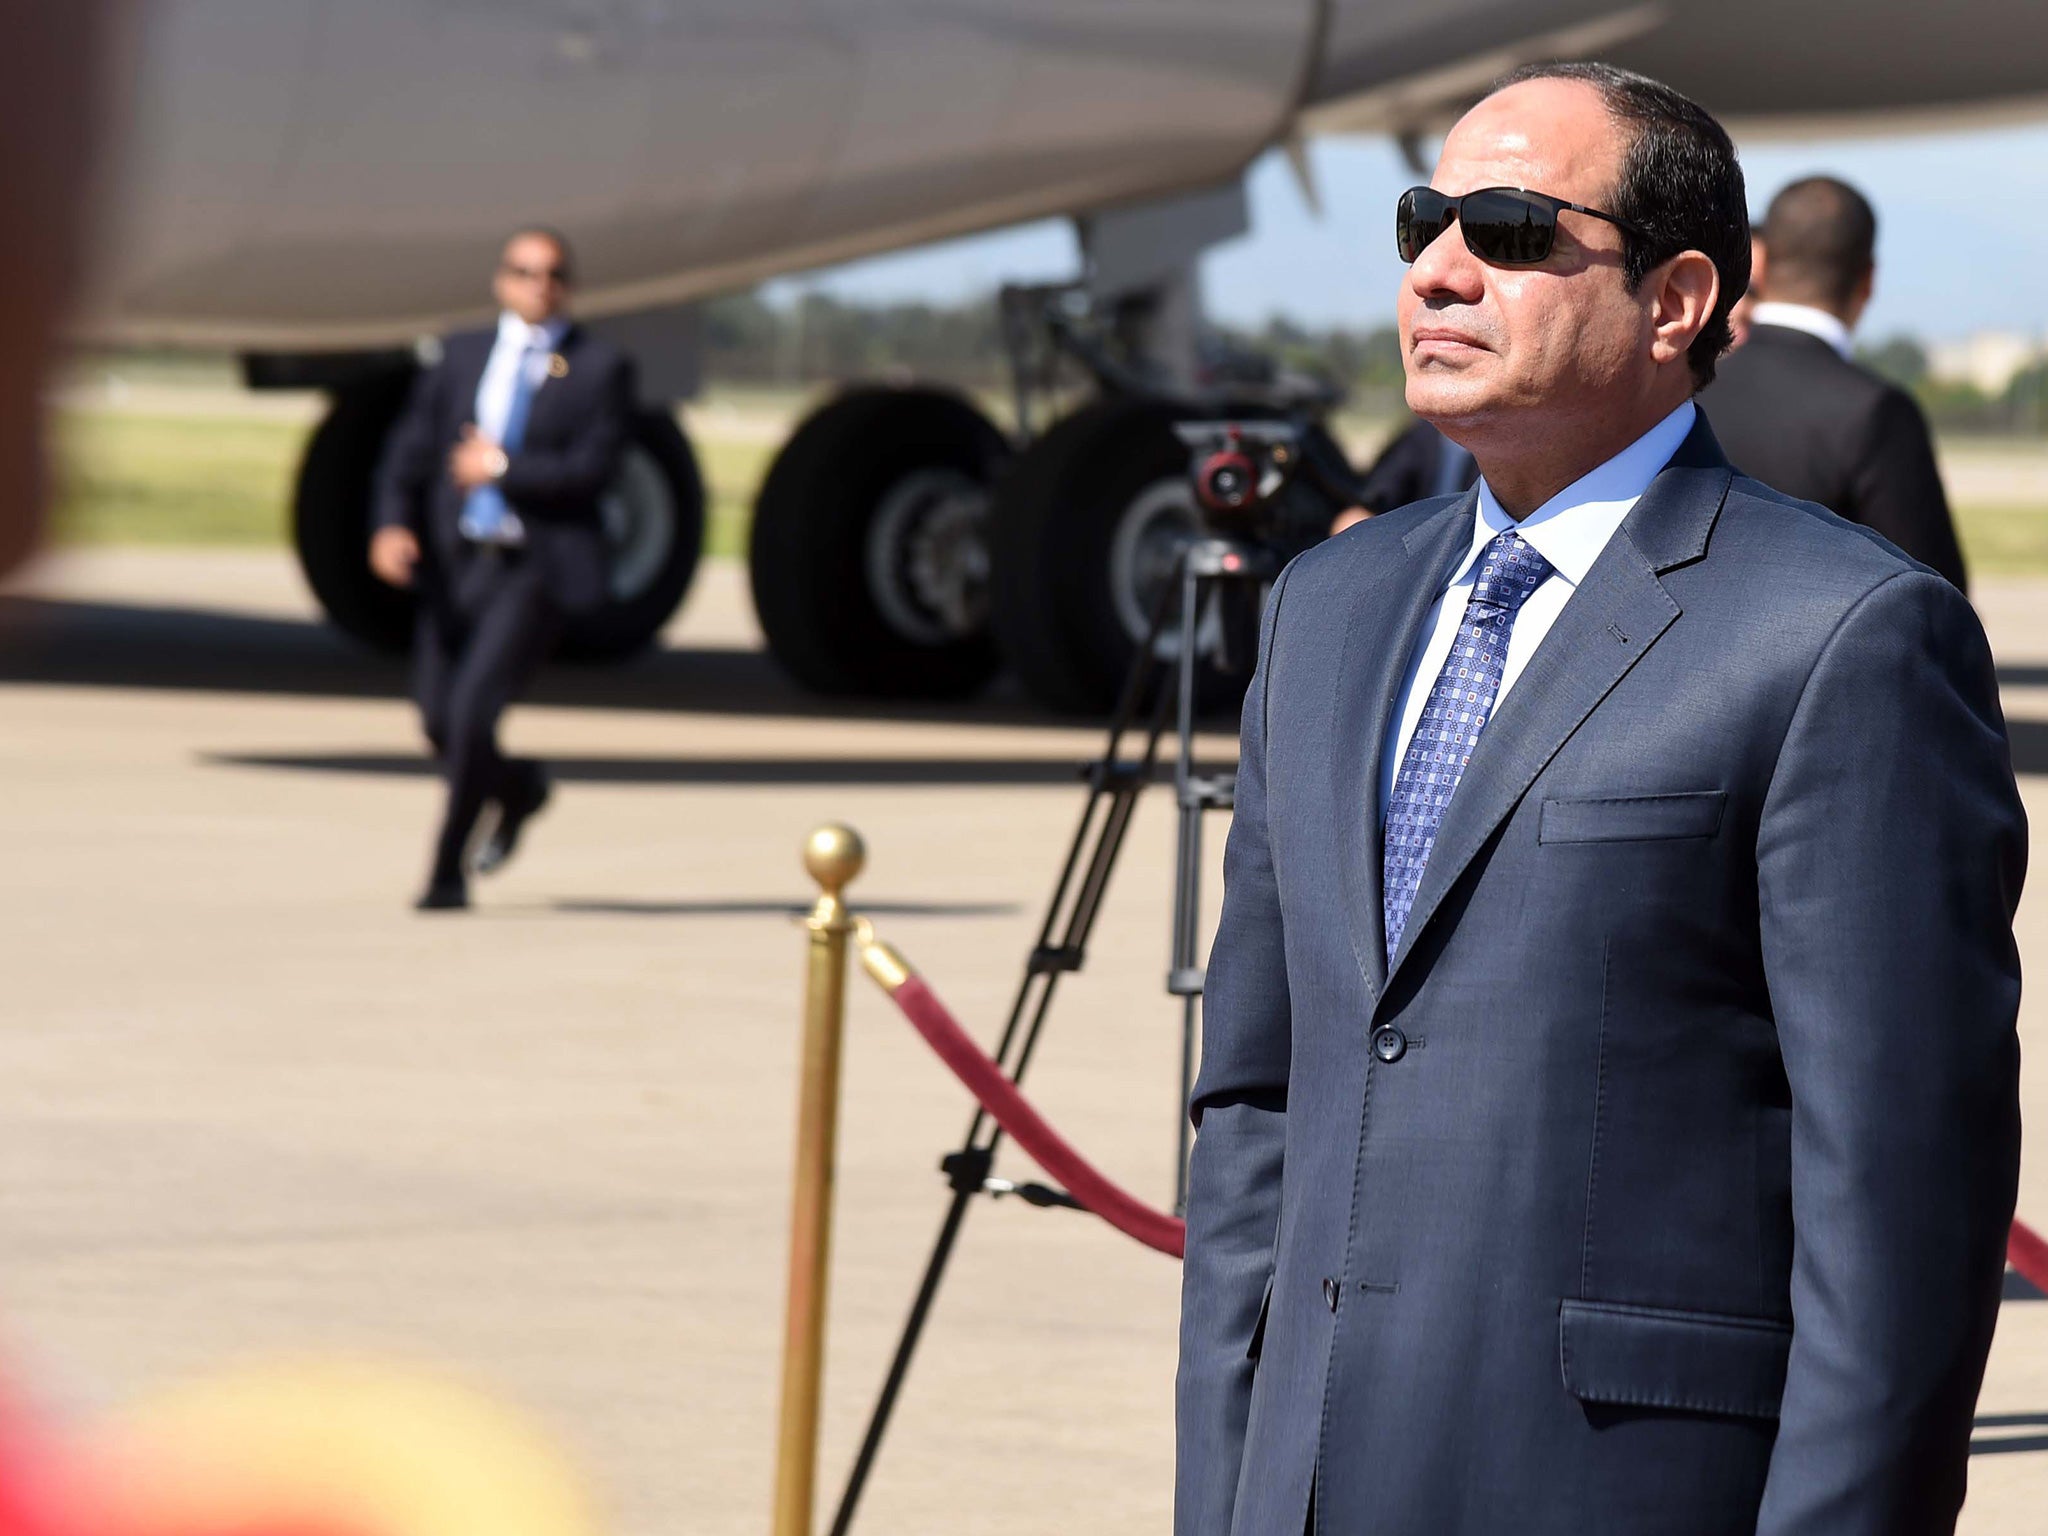 WPP have been accused of whitewashing the record human rights record of Abdel Fatah al-Sisi